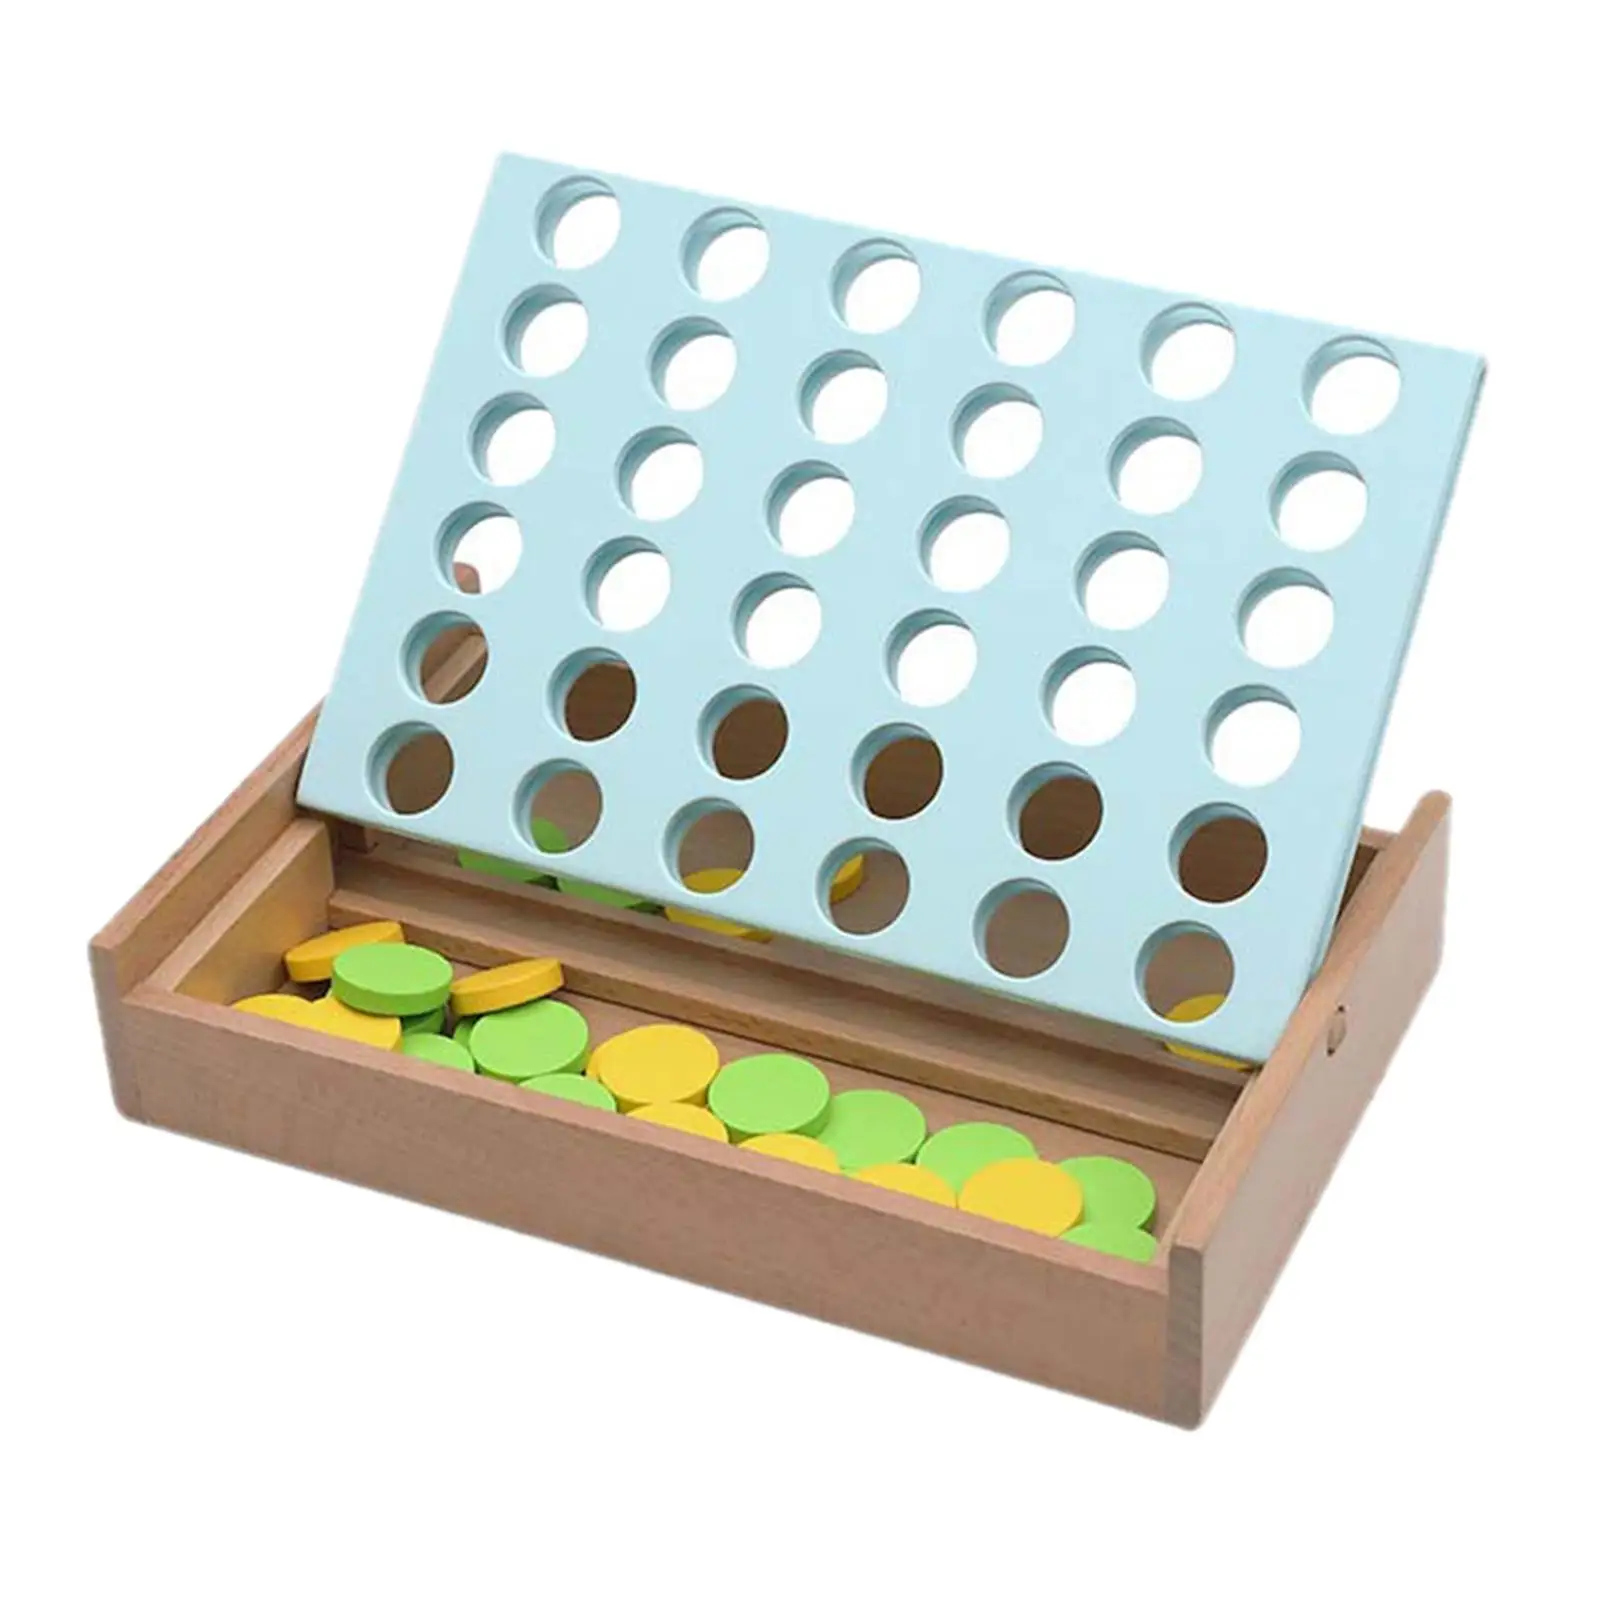 4 in A Row Game Educational Toy Wooden Connect Game Classic Strategy Game for Adults Boys Girls Children 6 Years Old Picnic